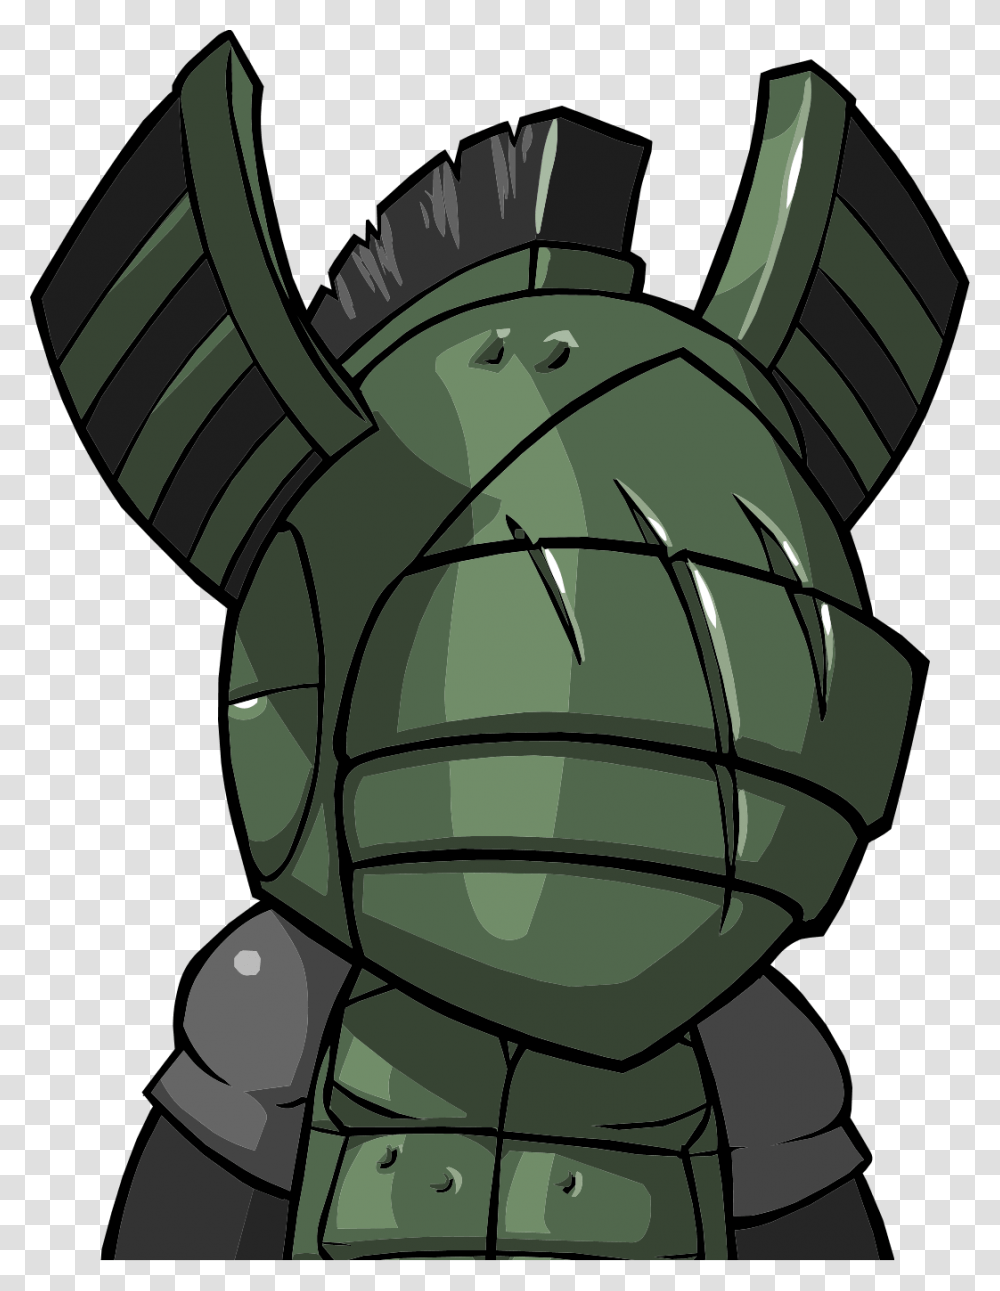 Castle Crashers Wiki Brute From Castle Crashers, Grenade, Bomb, Weapon, Weaponry Transparent Png